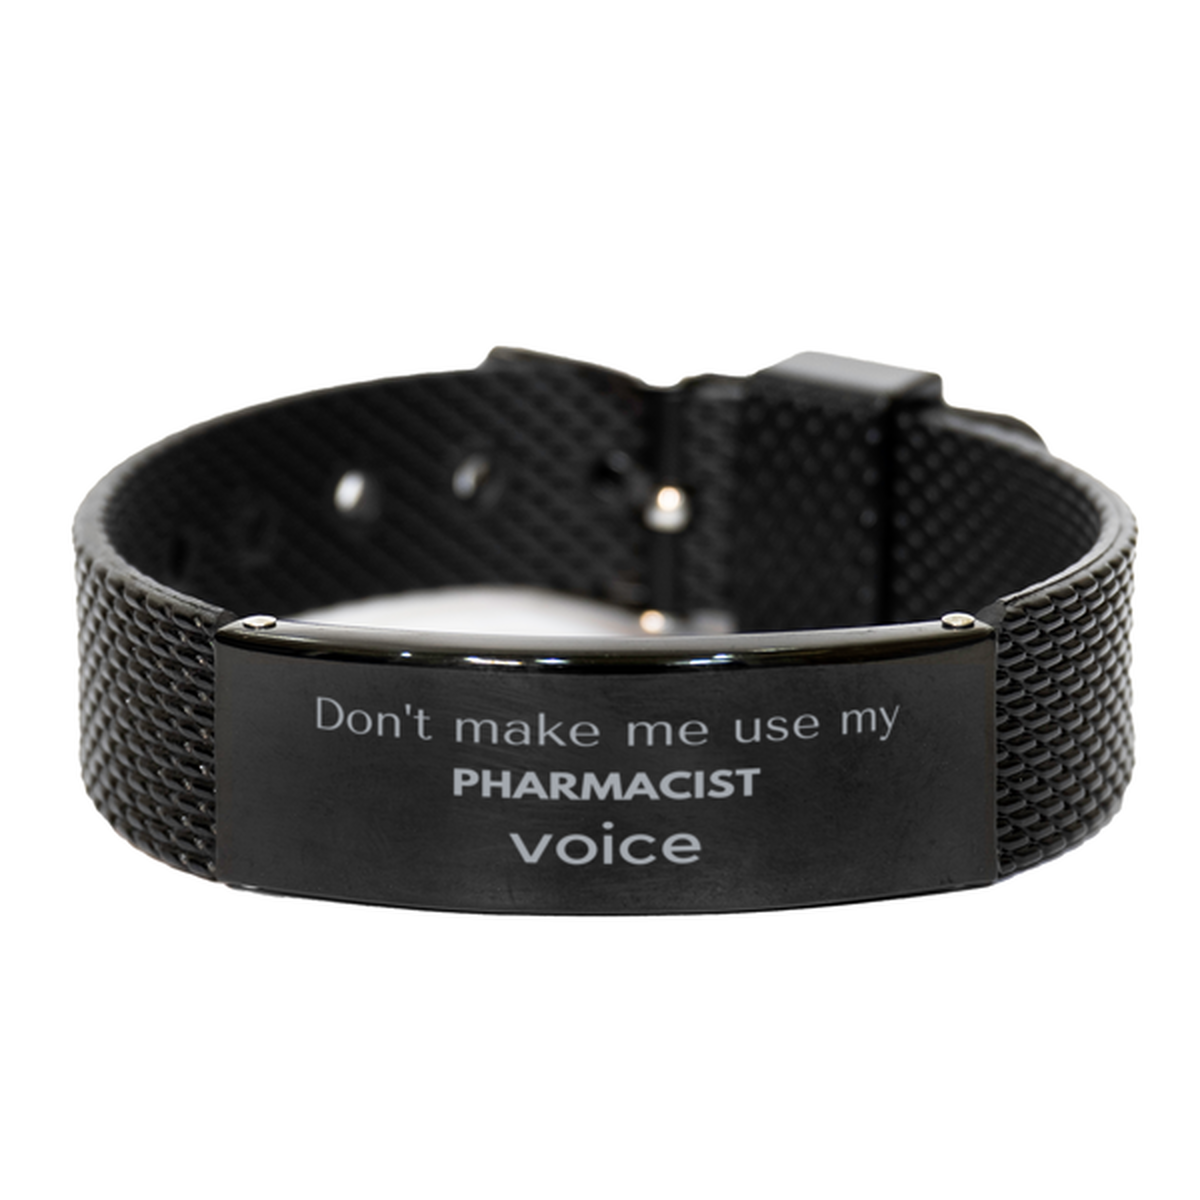 Don't make me use my Pharmacist voice, Sarcasm Pharmacist Gifts, Christmas Pharmacist Black Shark Mesh Bracelet Birthday Unique Gifts For Pharmacist Coworkers, Men, Women, Colleague, Friends